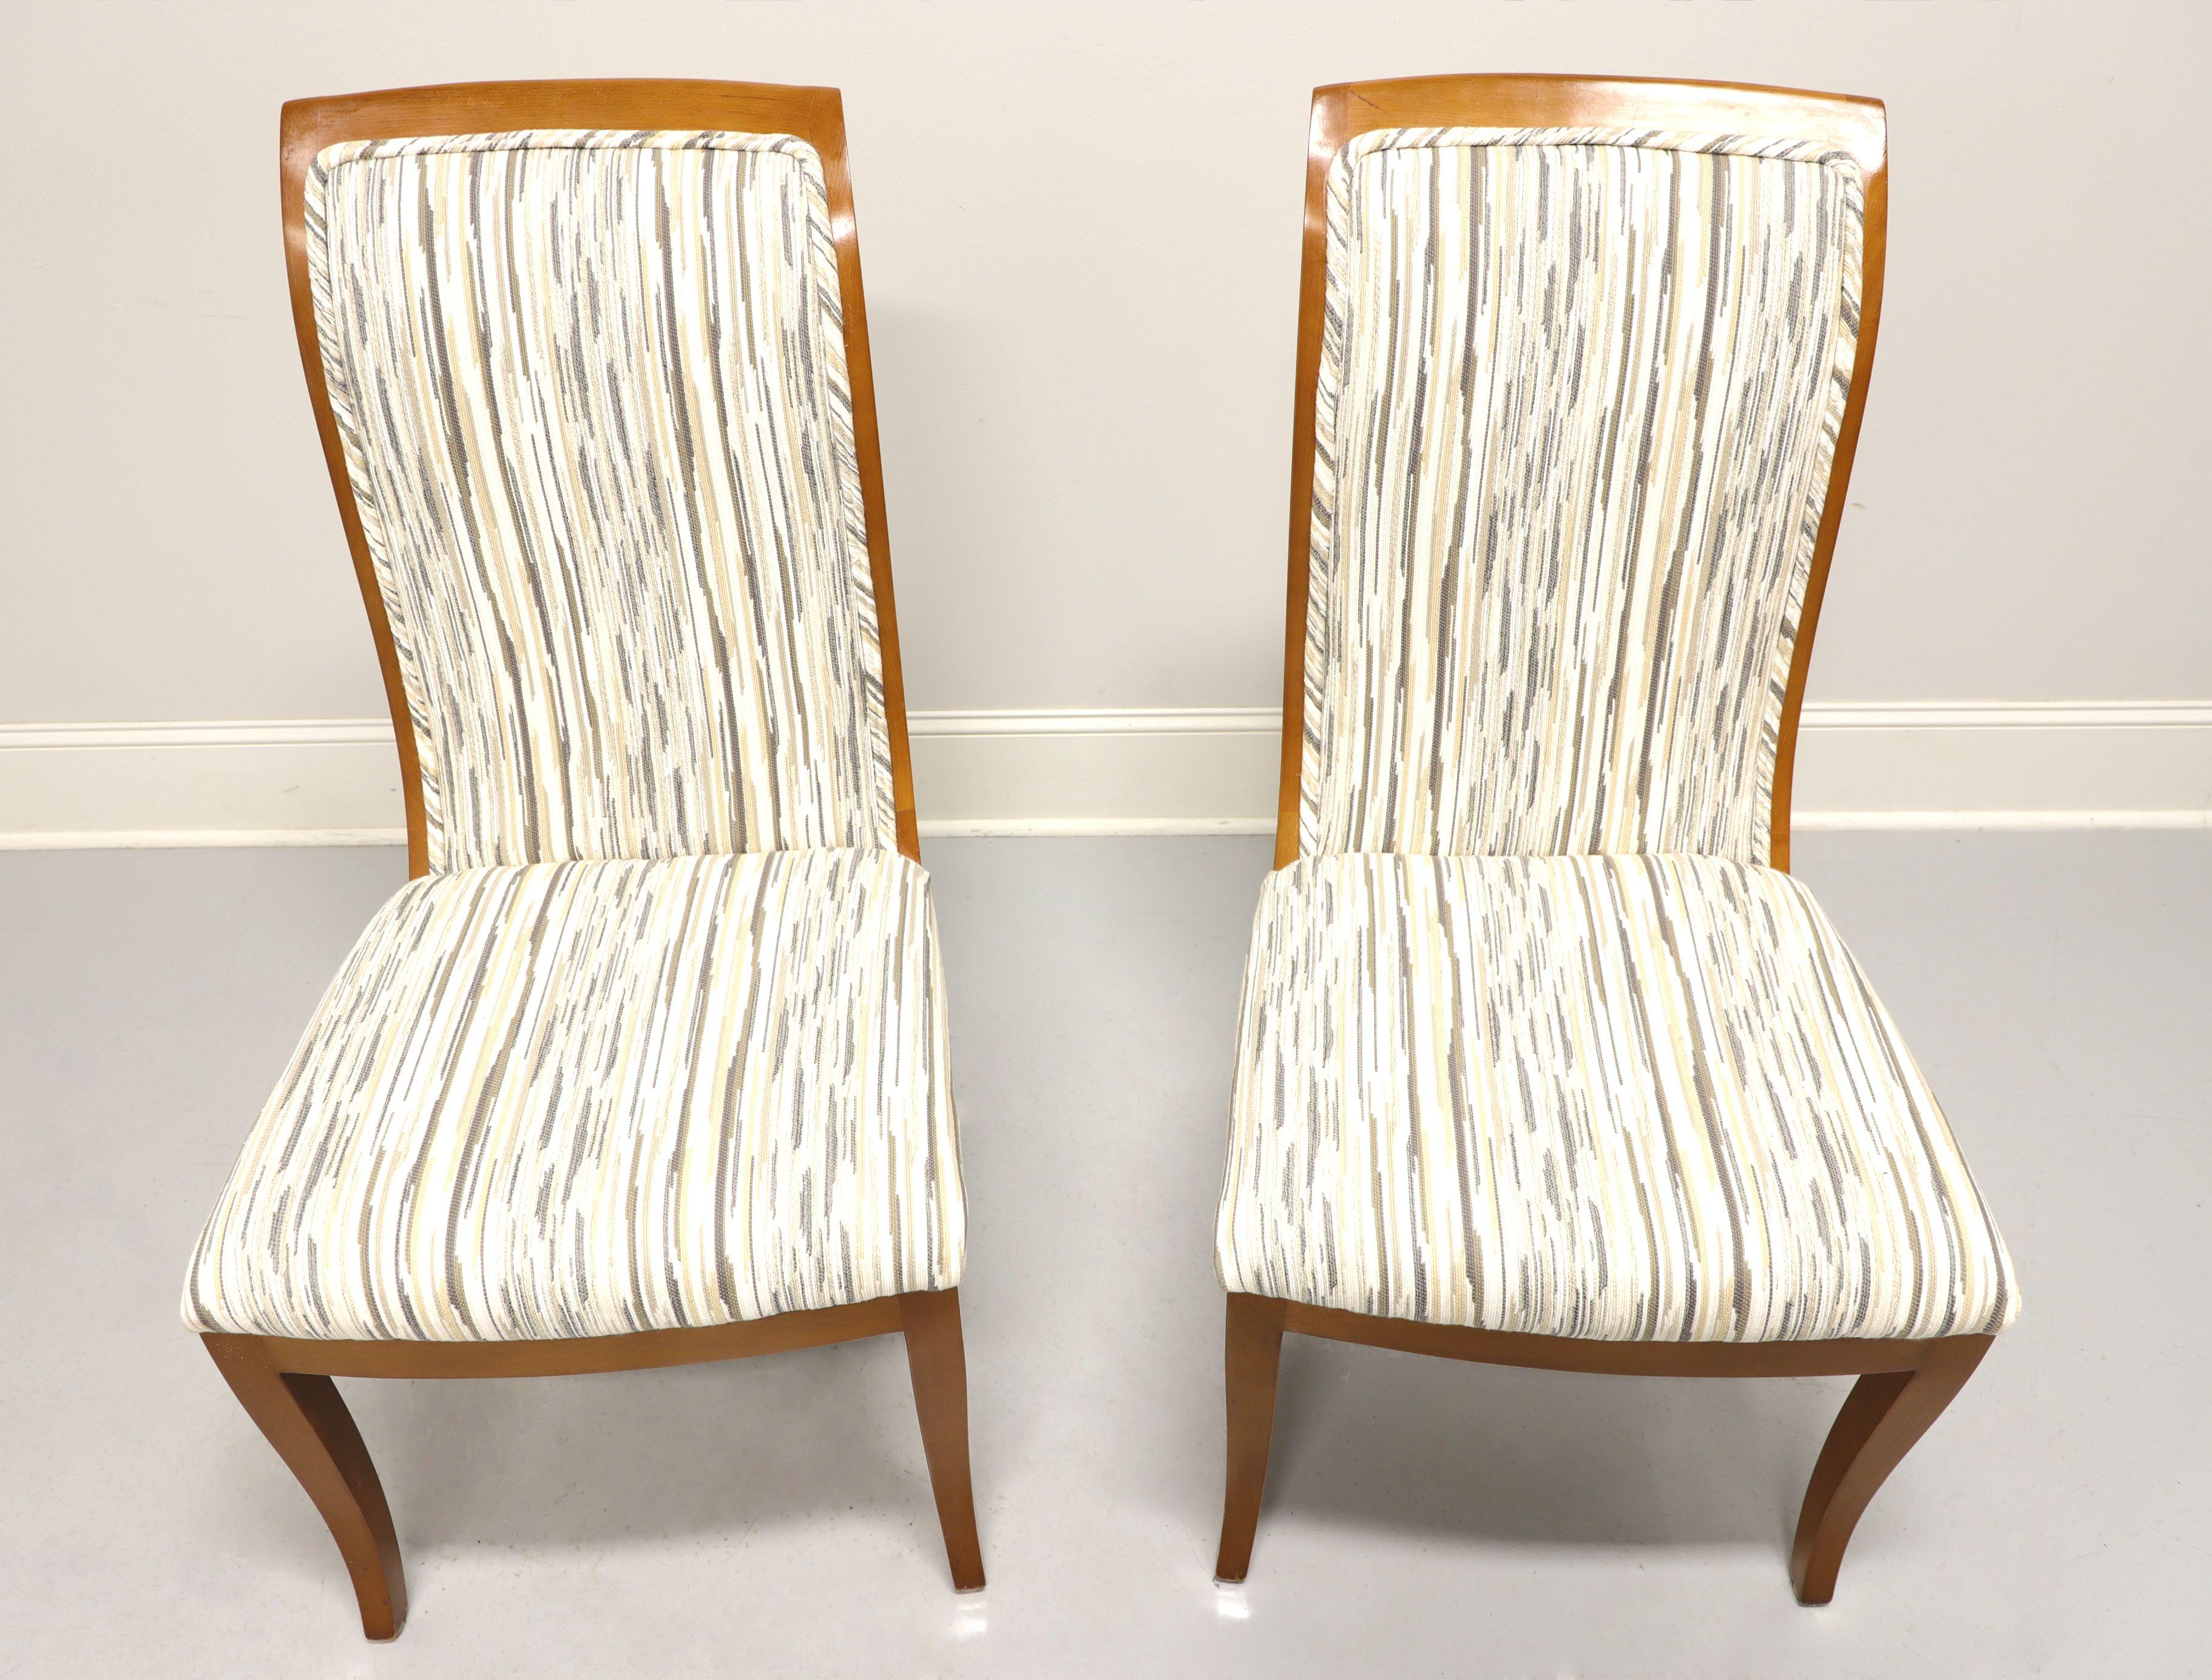 A pair of Contemporary style dining side chairs by Mastercraft, a division of Baker Furniture. Solid hardwood with multi-color neutral pattern fabric upholstered backs and seat. Tall rectangular shaped backs and saber legs. Made in Grand Rapids,